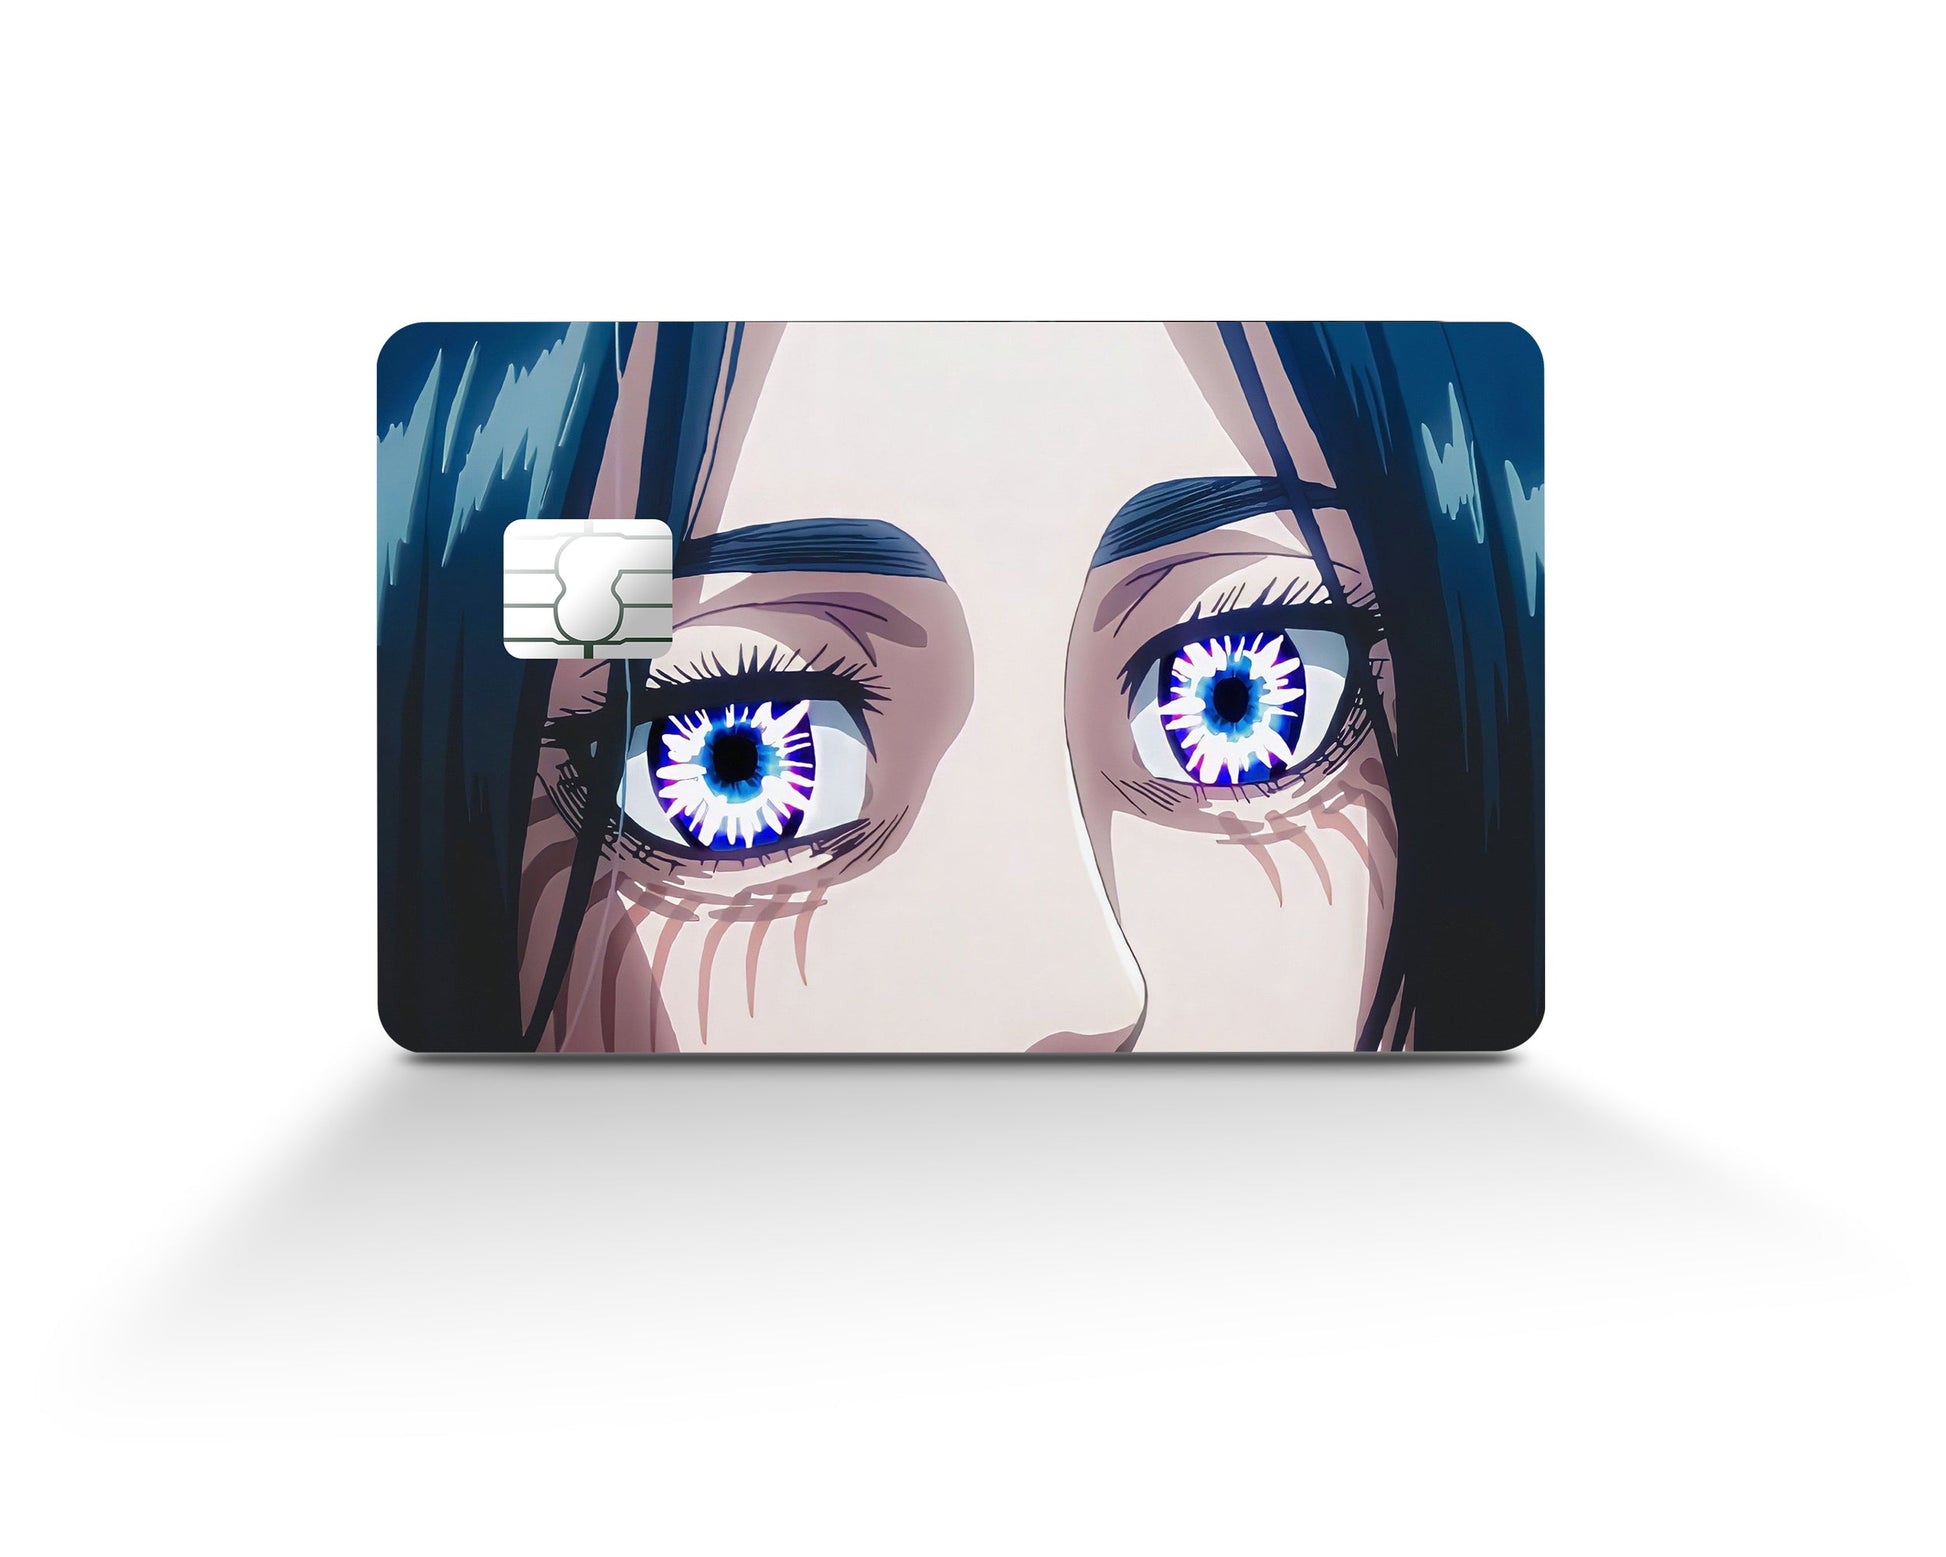 Anime Town Creations Credit Card Attack on Titan Eren Yeager Eyes Full Skins - Anime Attack on Titan Credit Card Skin